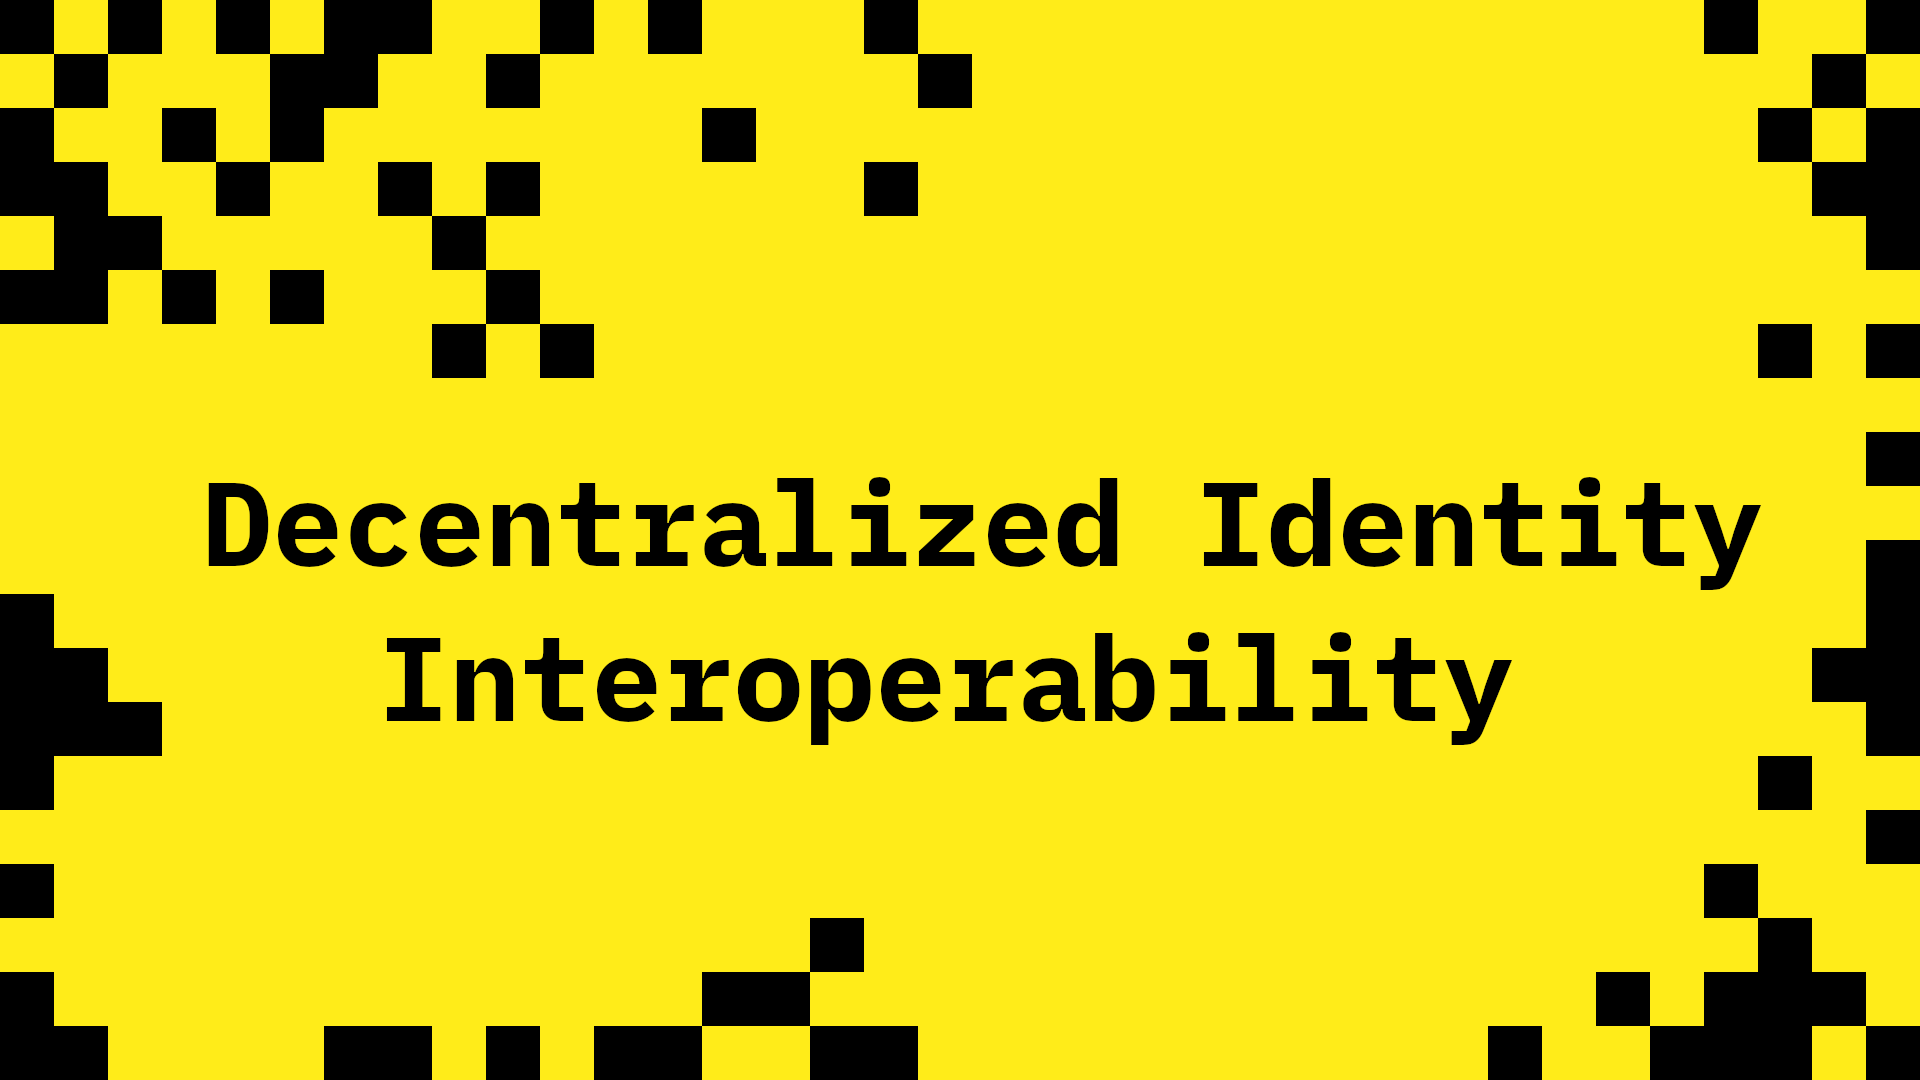 Our Interoperability Work in the Decentralized Identity Foundation